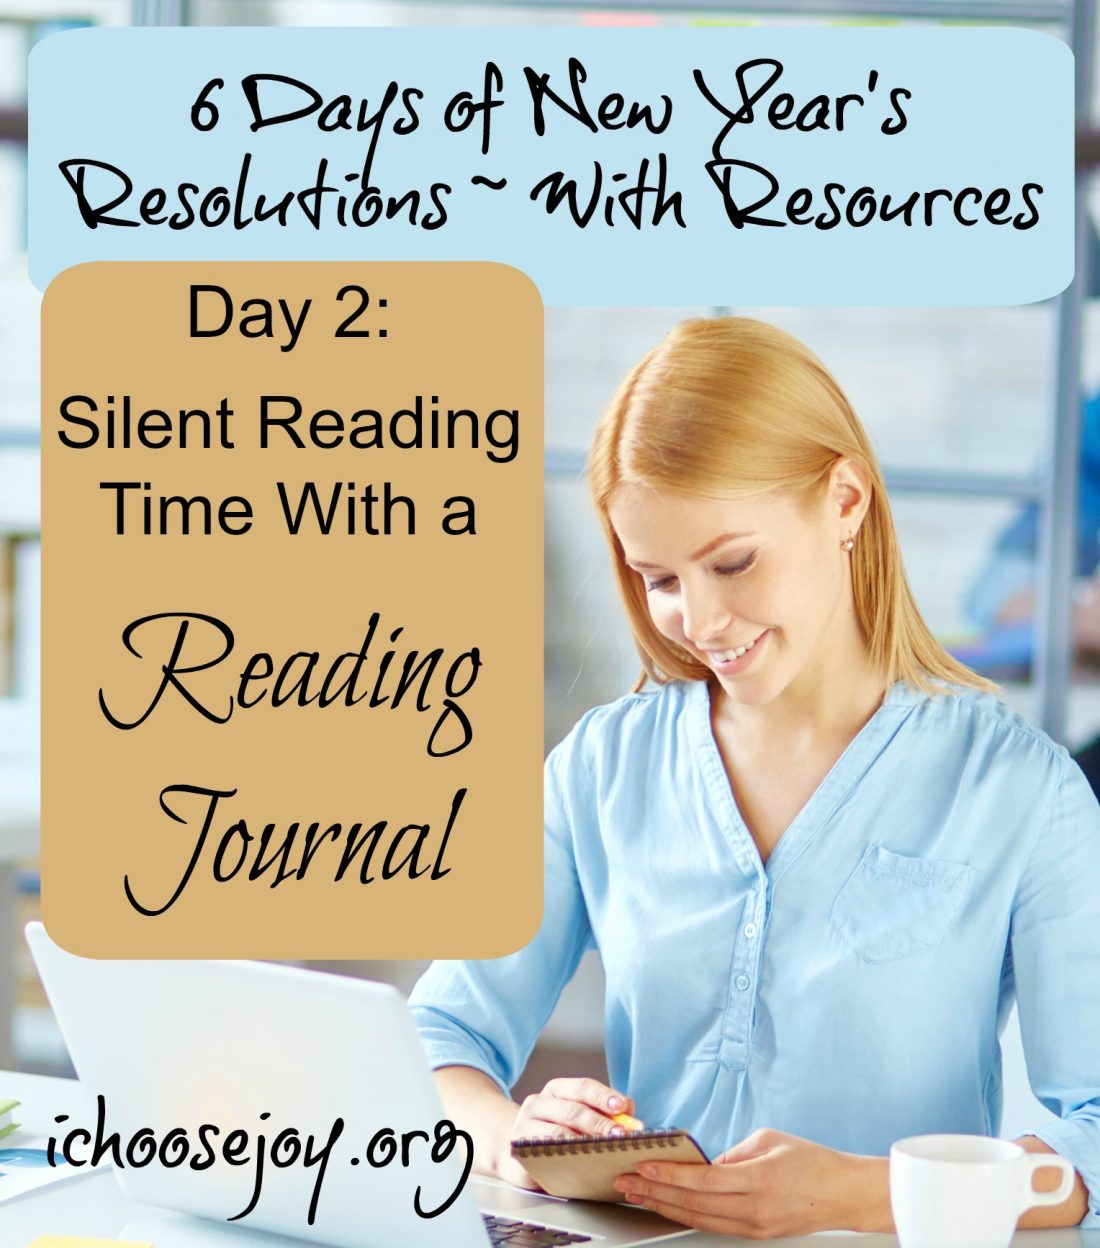 Silent Reading Time with a Reading Journal: Day 2 of “6 Days of New Year’s Resolutions”